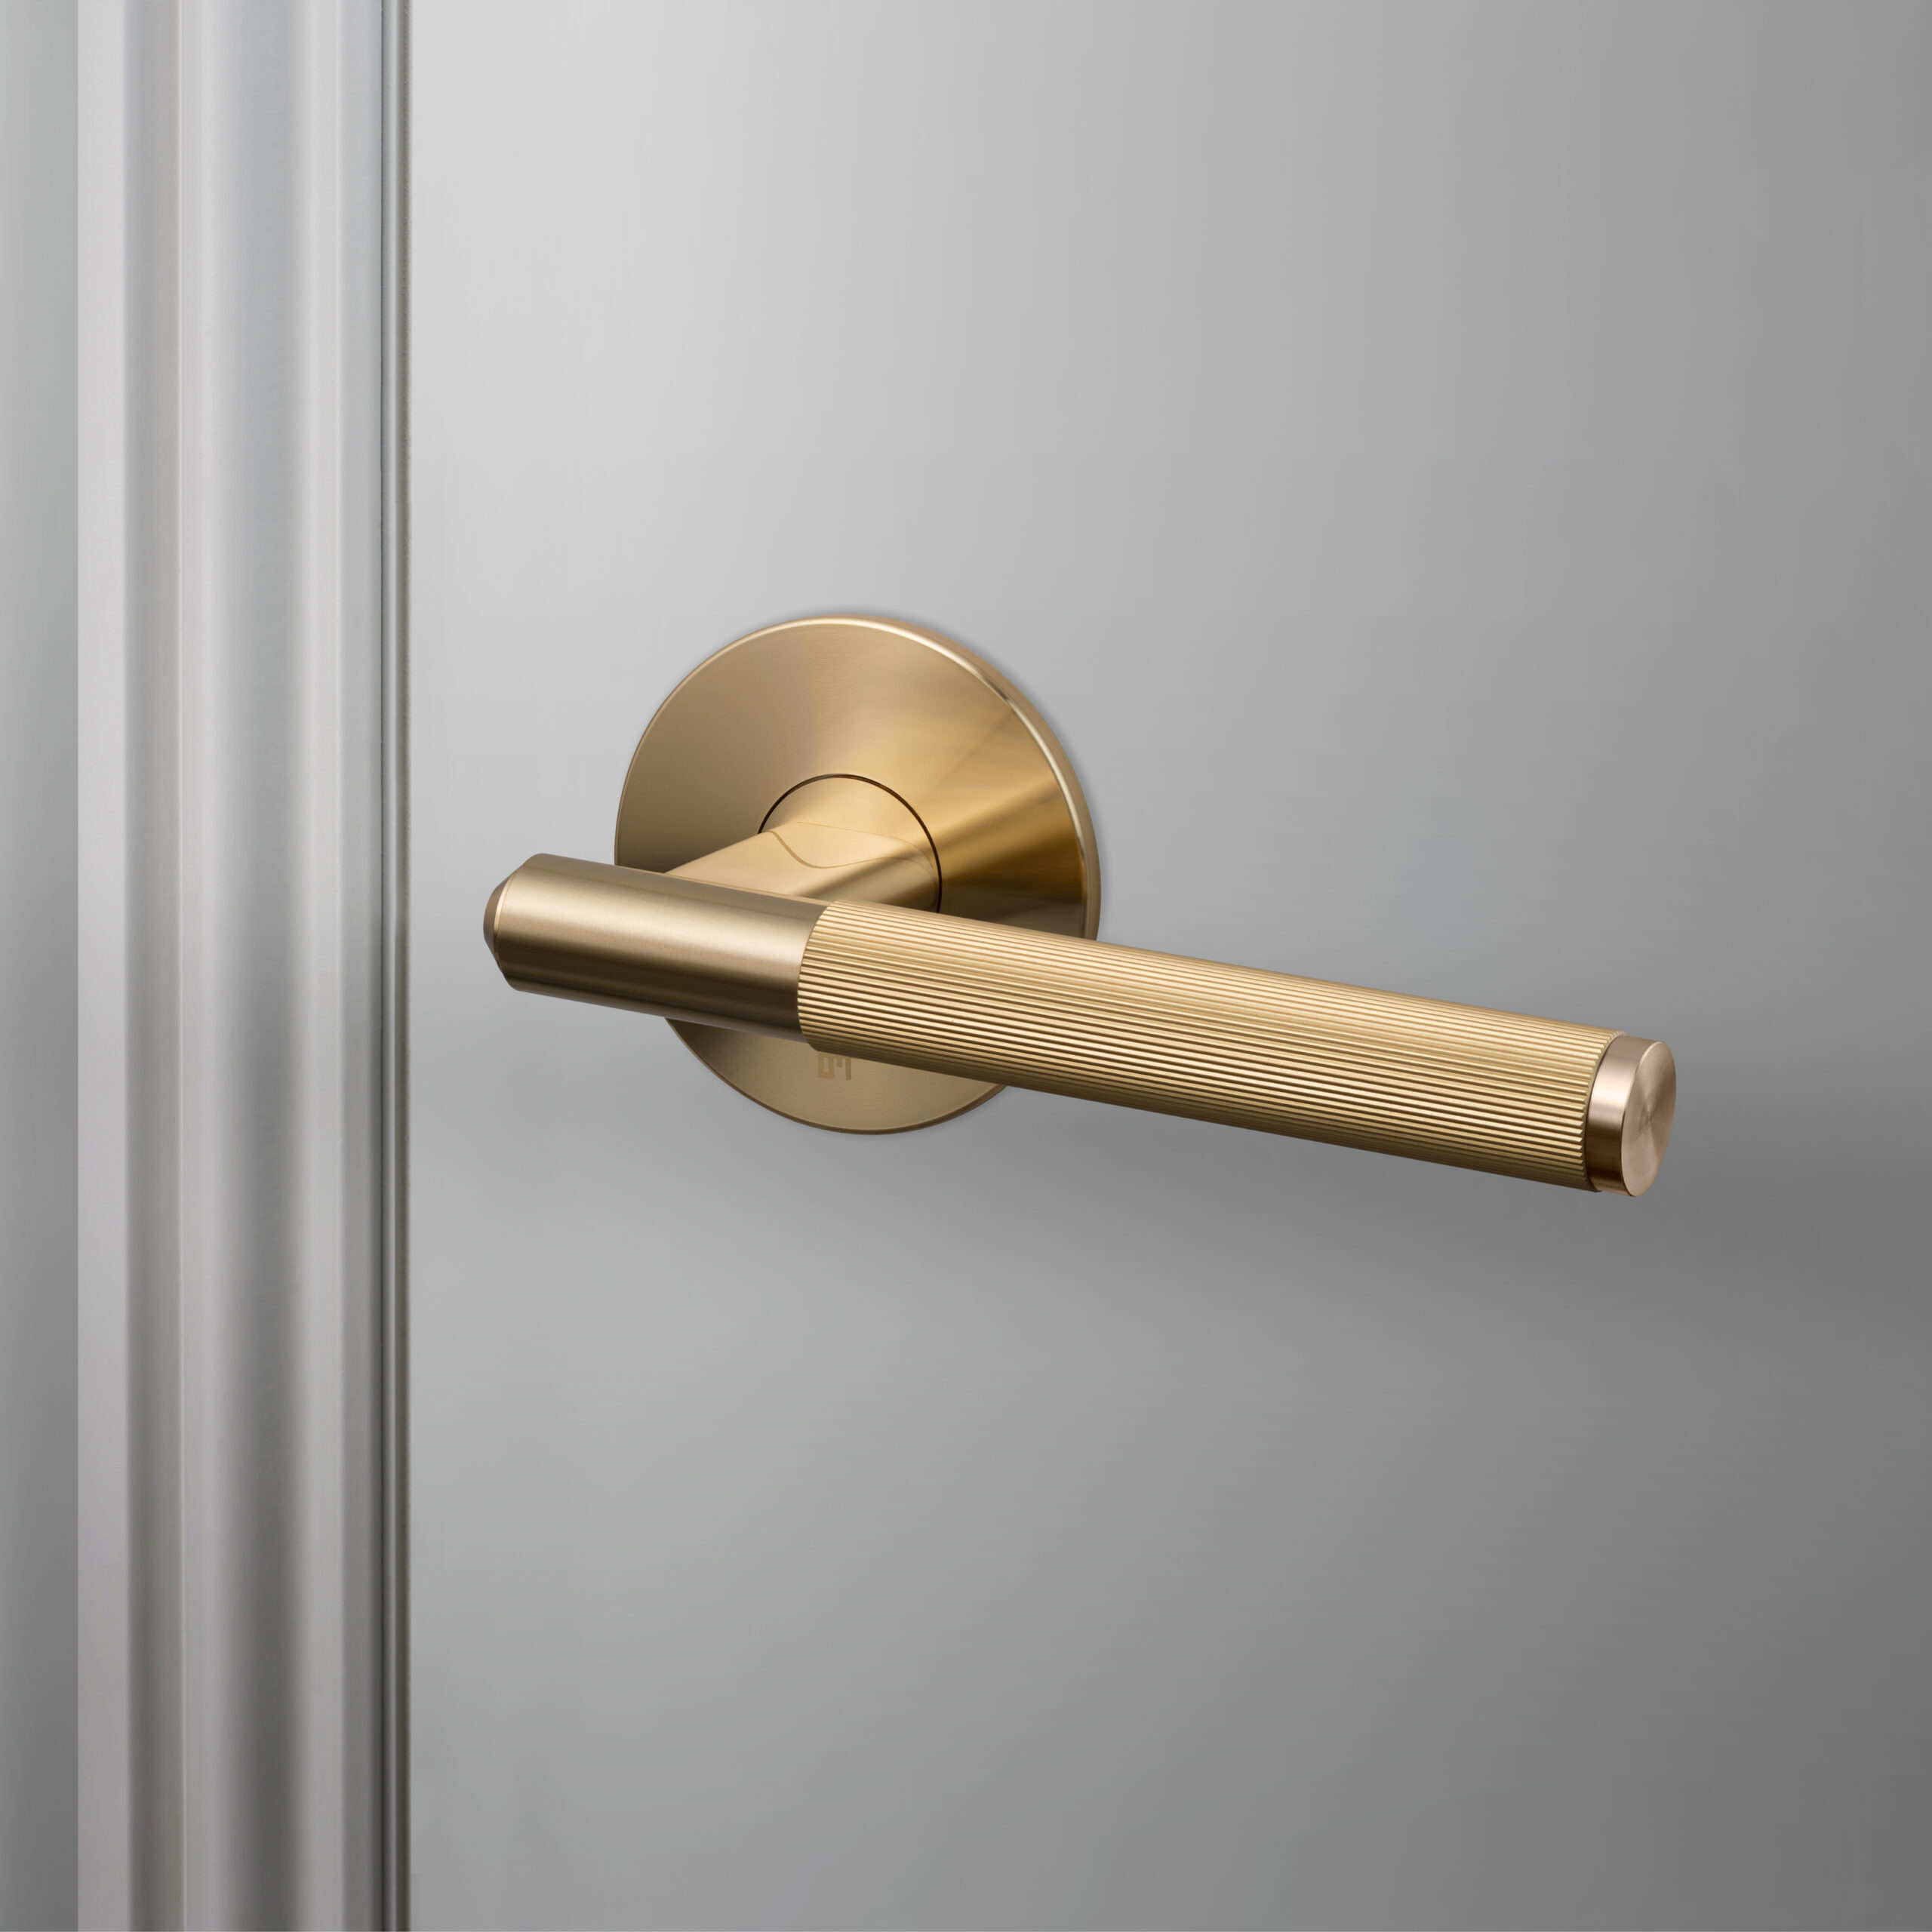 https://www.busterandpunch.com/us/wp-content/uploads/sites/2/2021/04/NA_Door-handle_Passage_Linear_Brass_A1_Web_Square-scaled.jpg